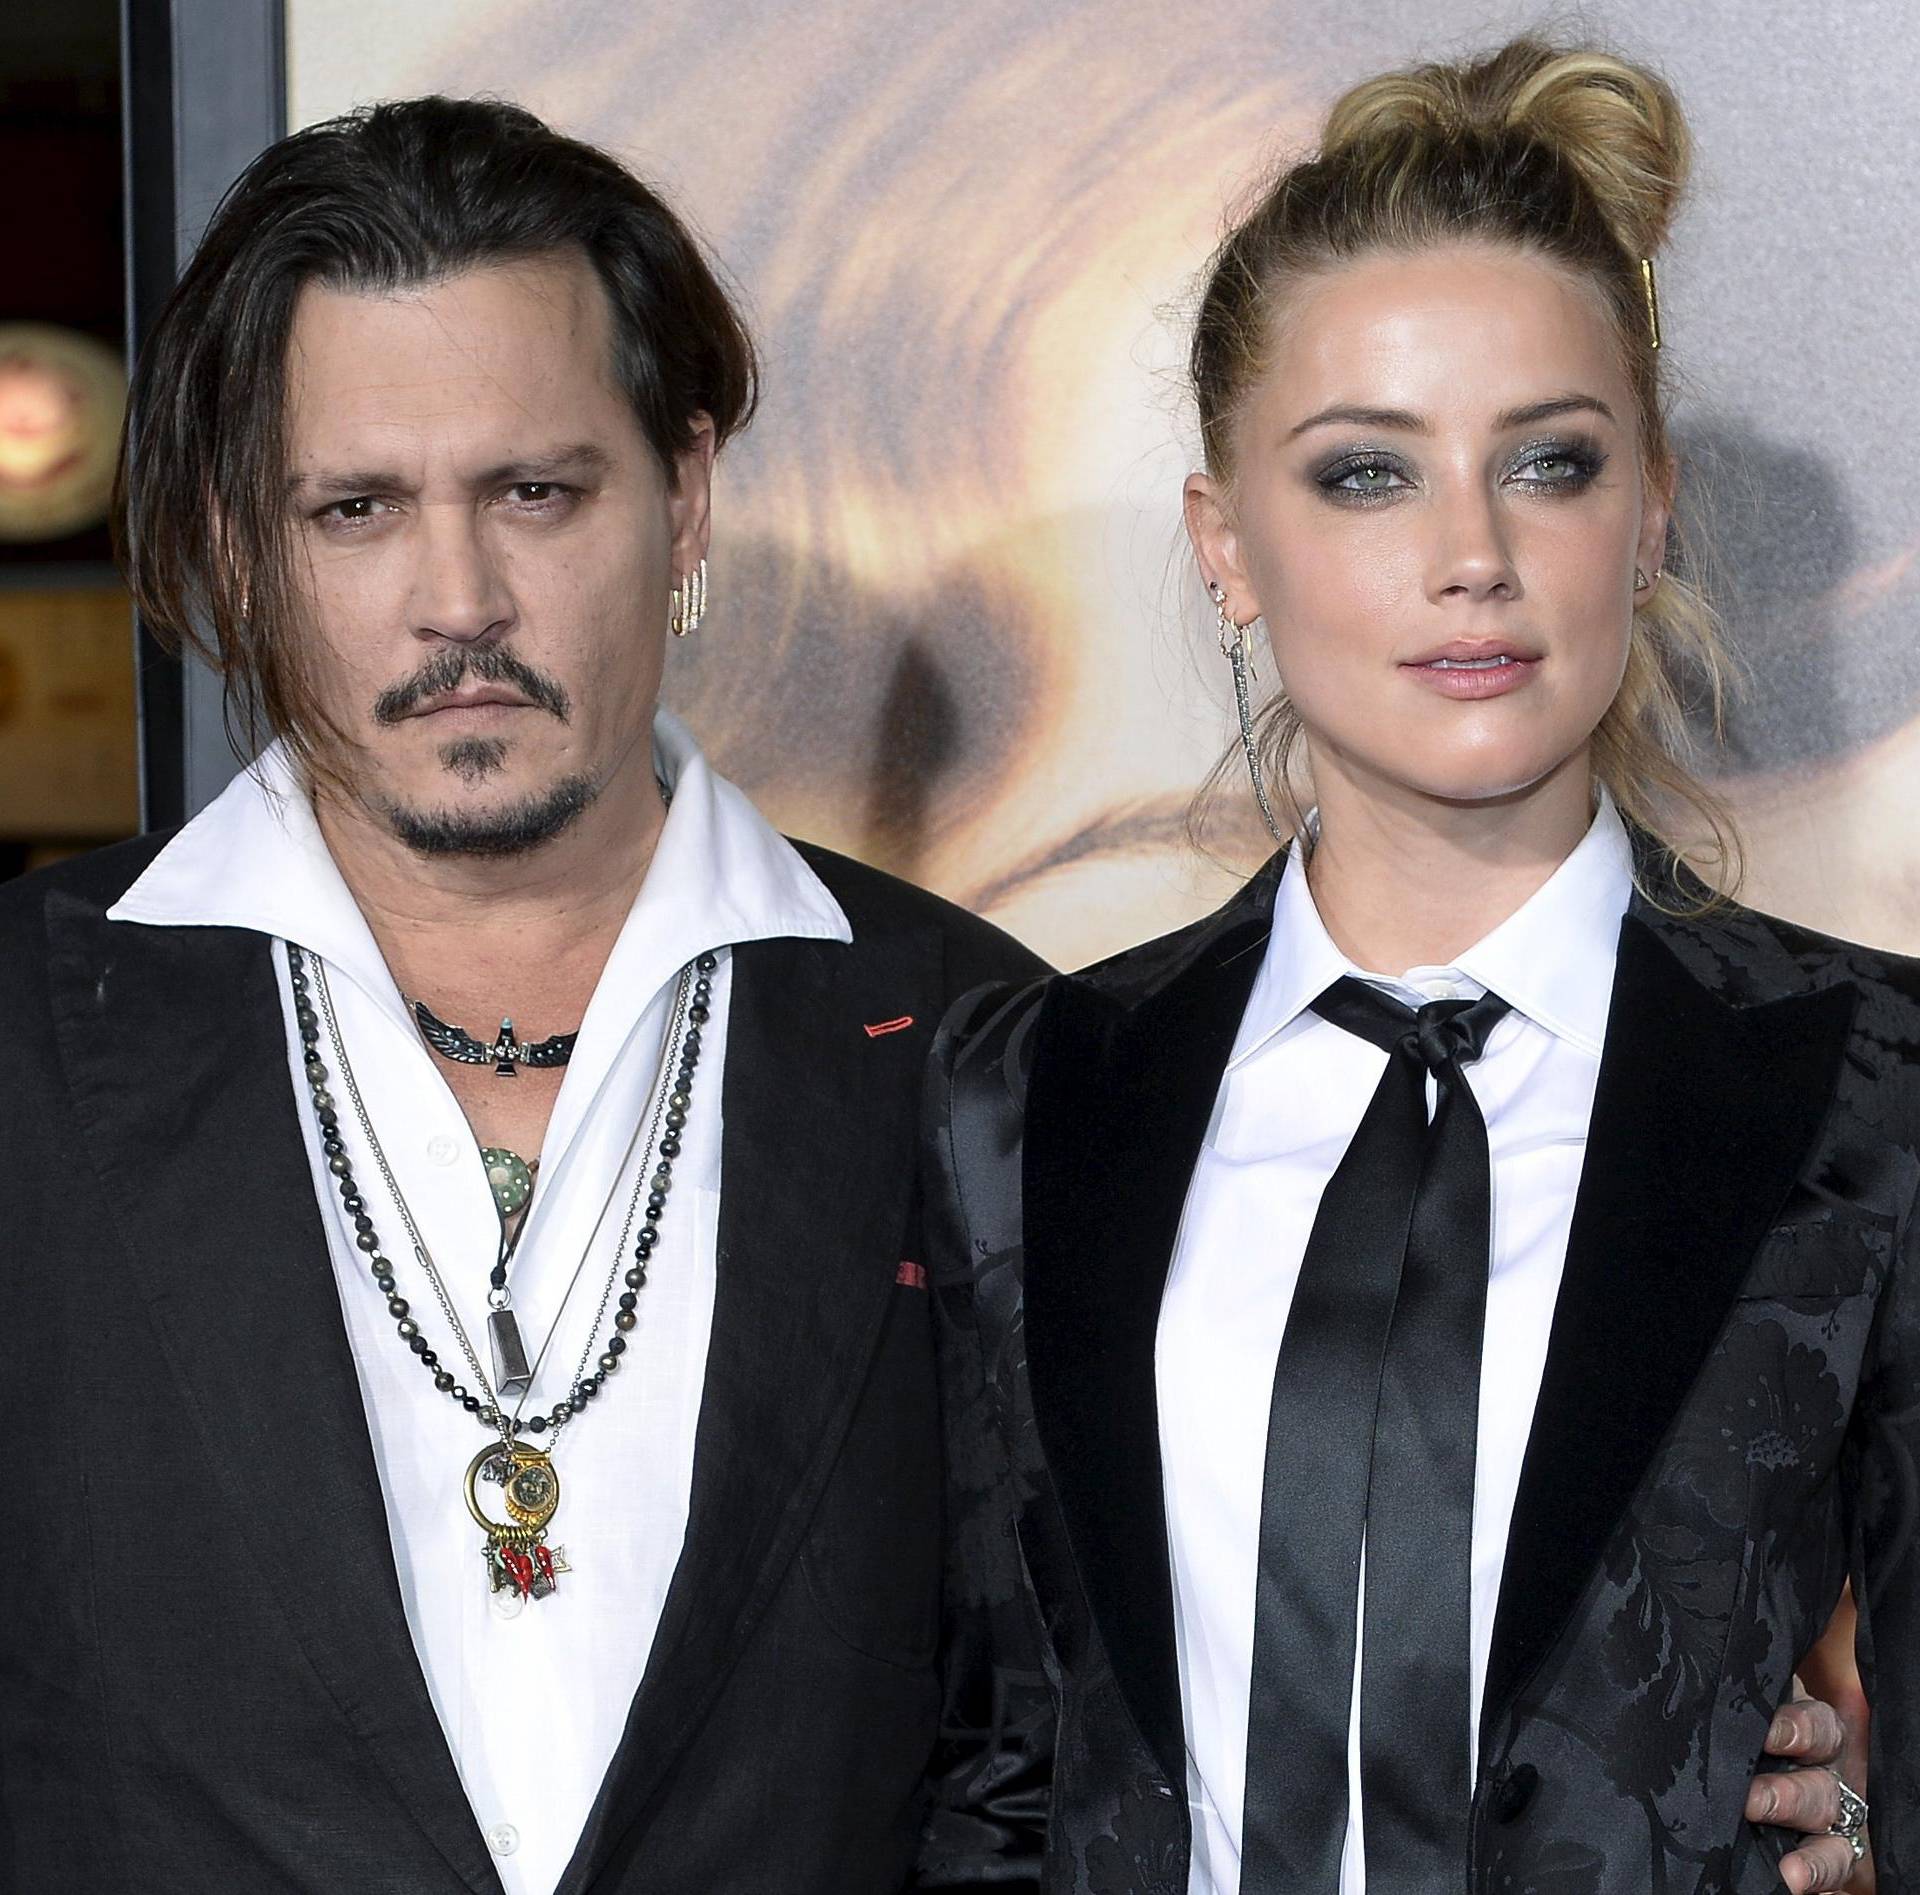 Cast member Amber Heard and husband Johnny Depp pose during the premiere of the film "The Danish Girl," in Los Angeles